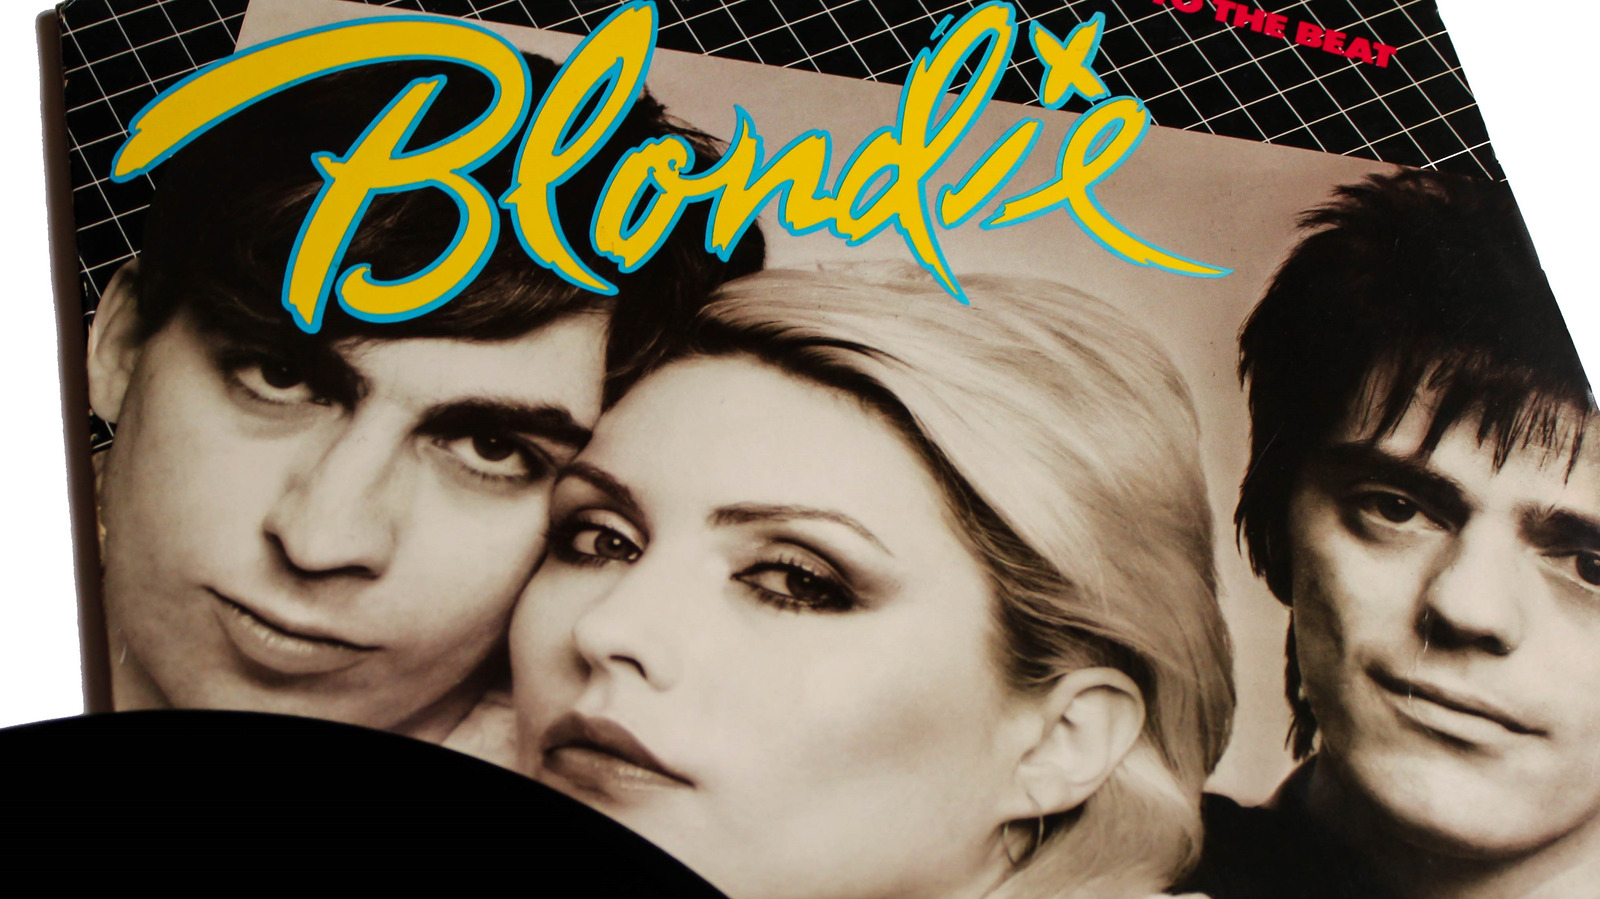 Blondie Went By This Before Settling On Their Final Name